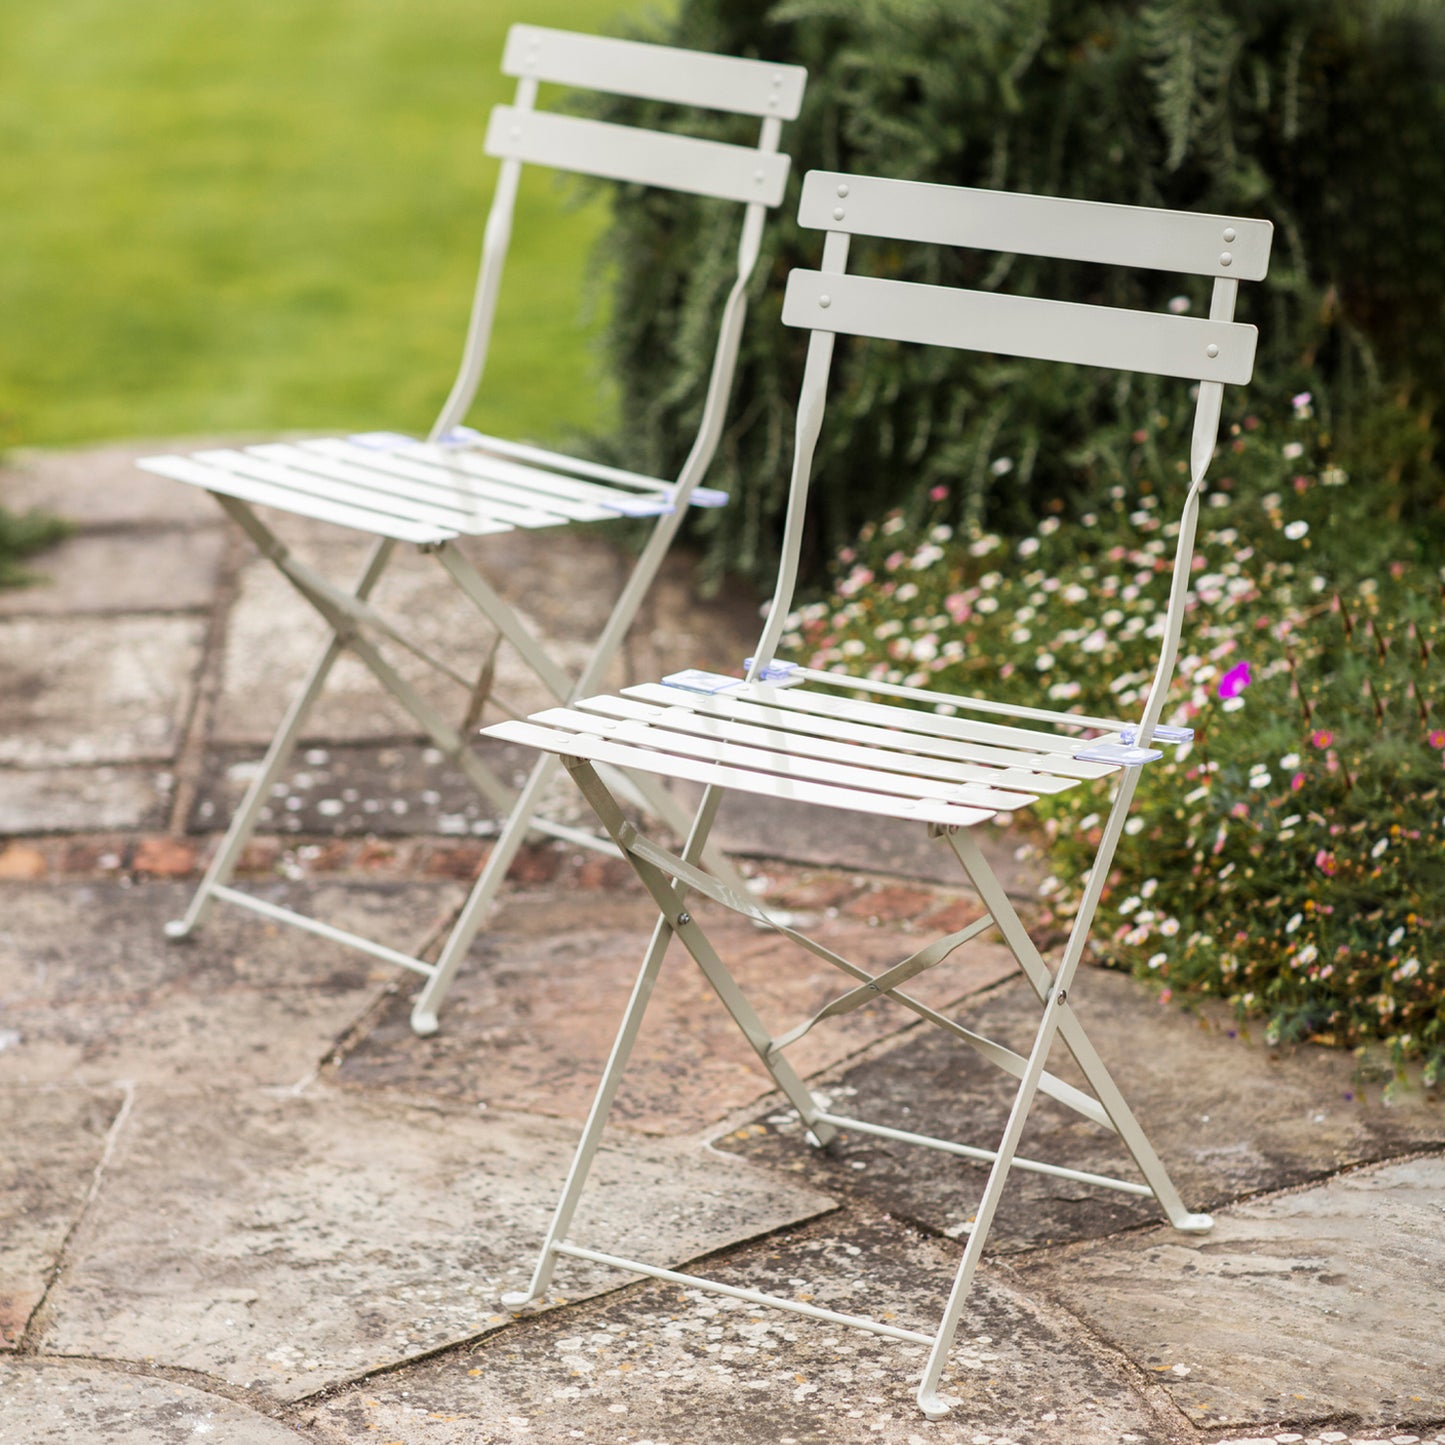 Pair of Bistro Outdoor Chairs Clay Steel by Garden Trading